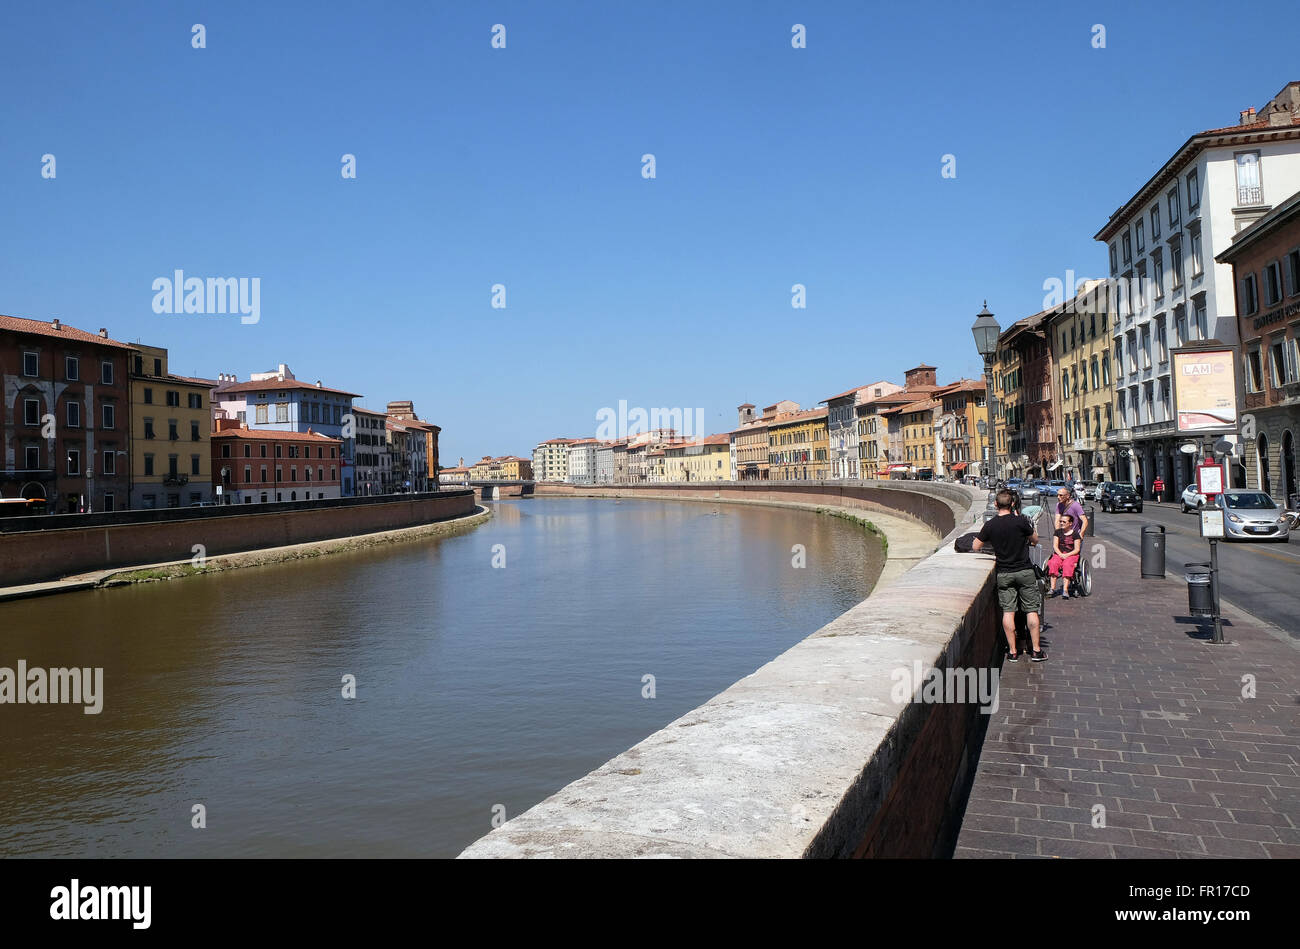 River Arno floating through the medieval city of Pisa in Italy, on June 06, 2015 Stock Photo